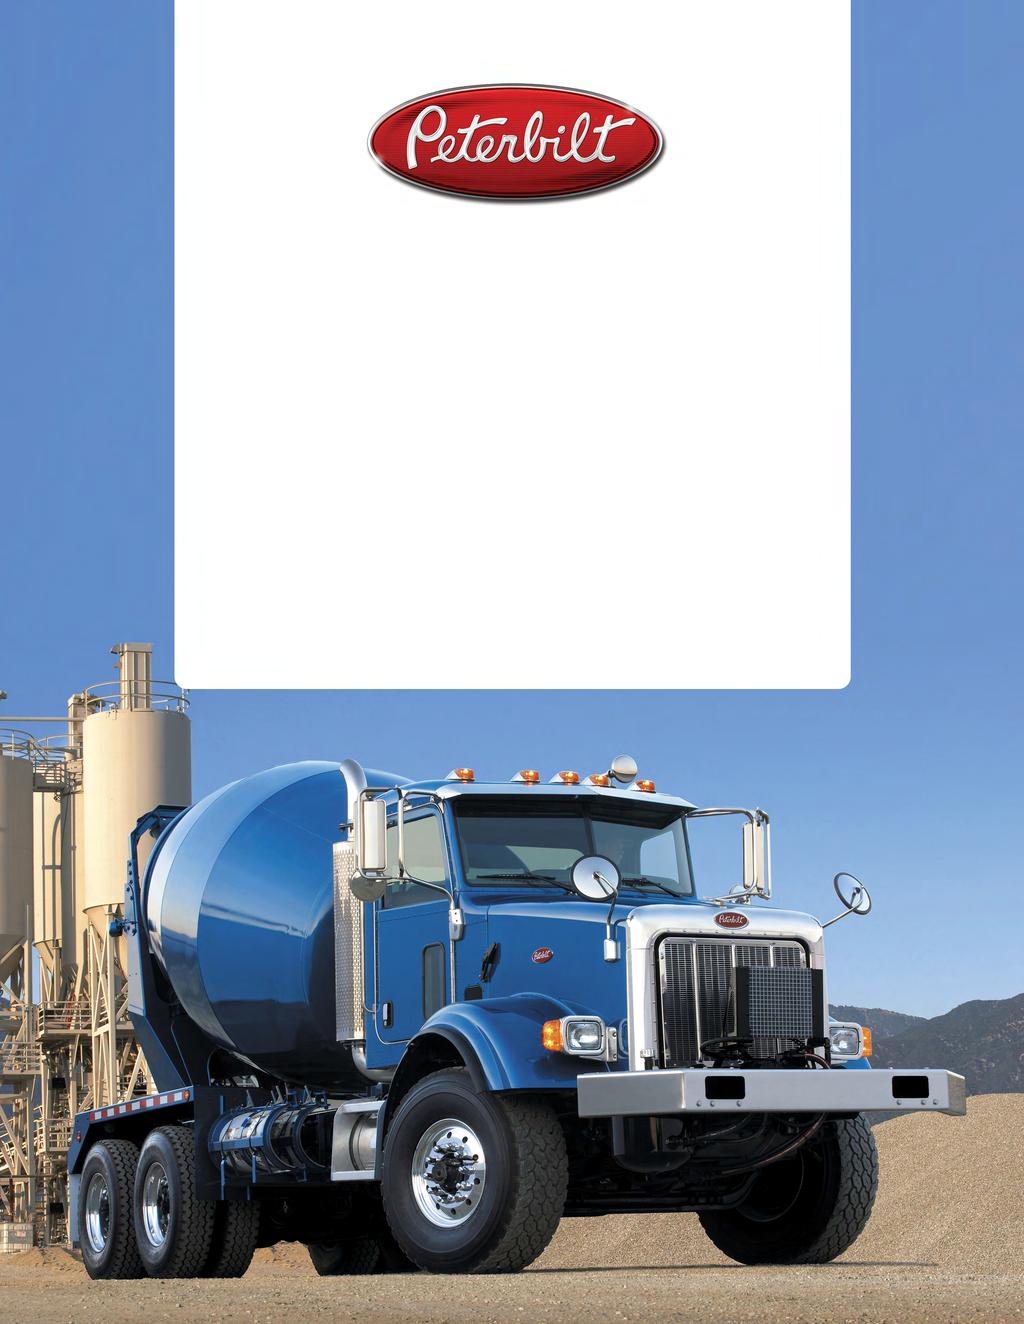 Quality Aftermarket Parts and Components Welcome to the Peterbilt Insurance Collision Repair Catalog. Inside you will find a selection of repair parts that are commonly used in front end collisions.